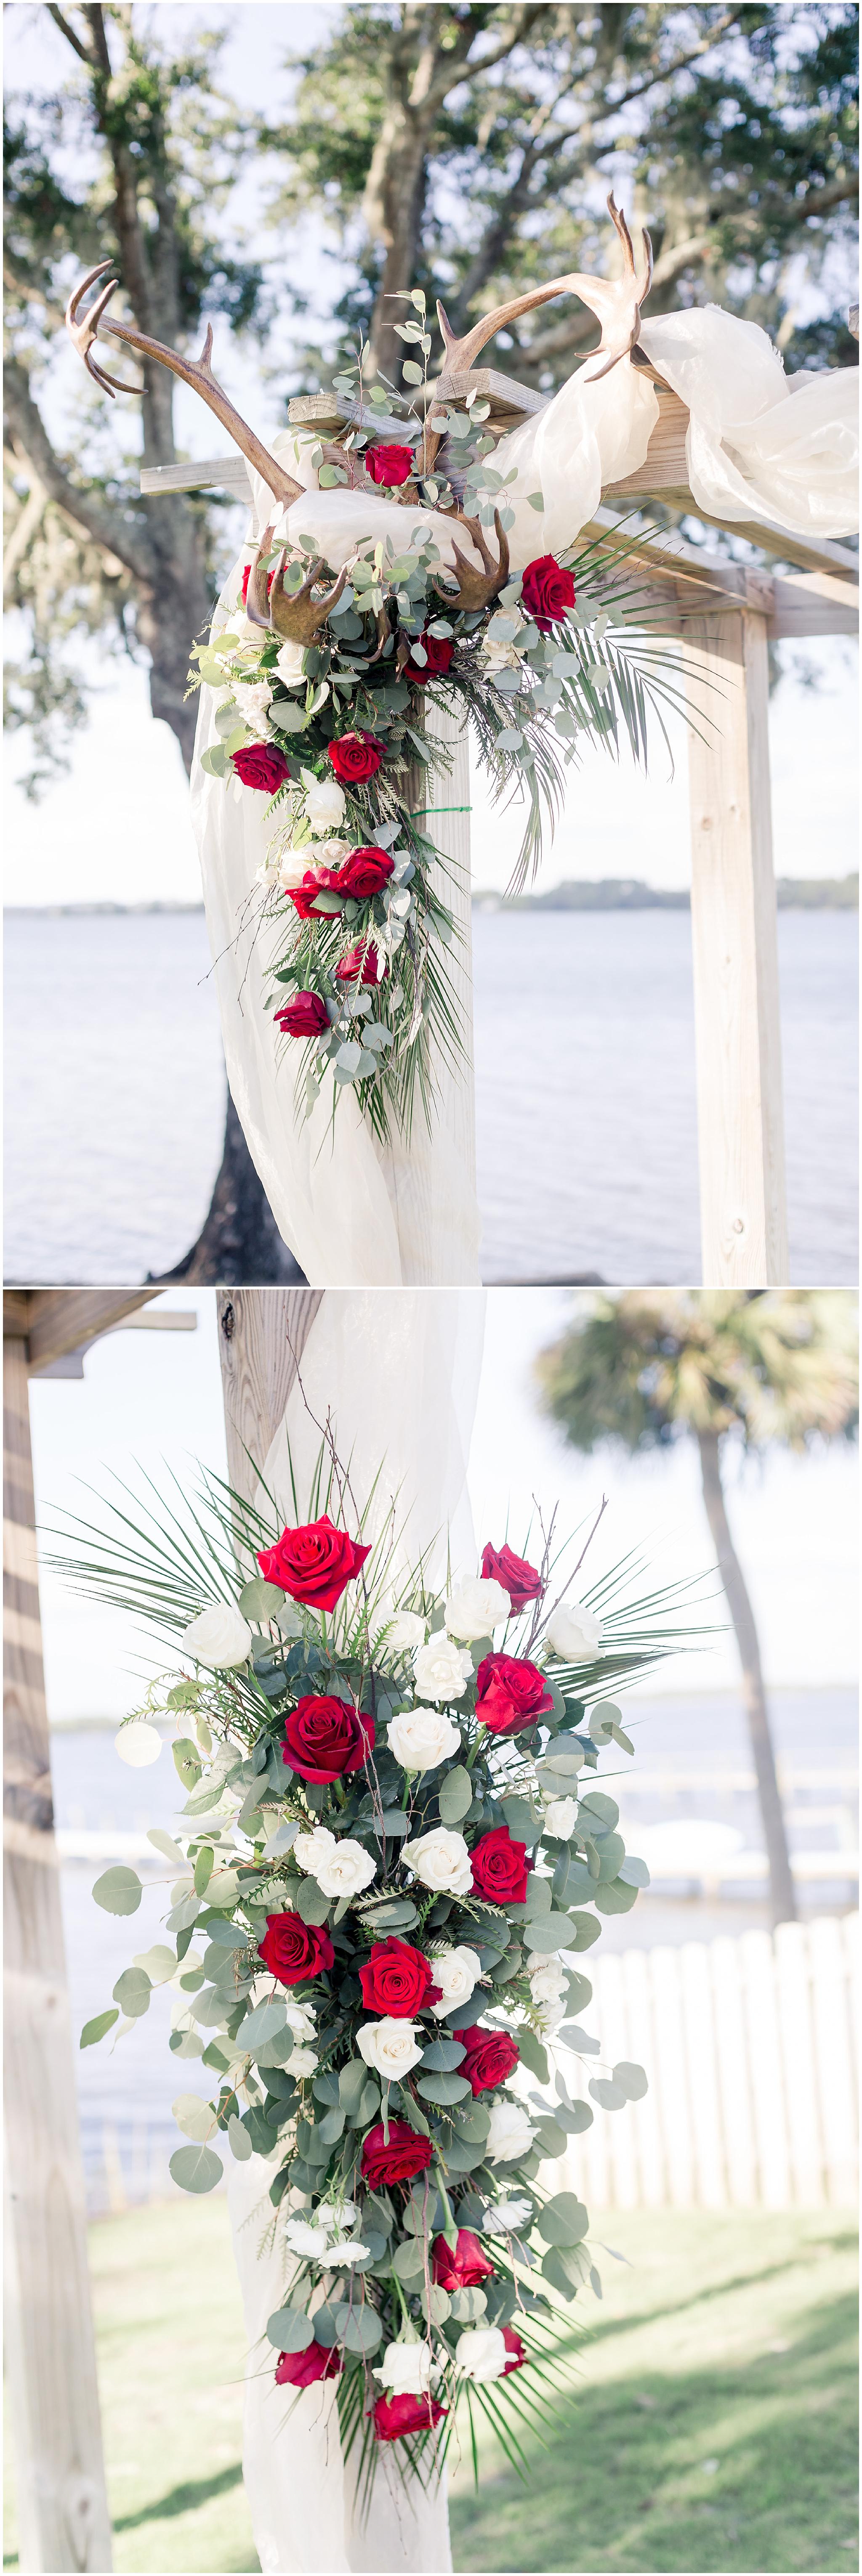 Panama City Country Club Wedding Venue Pictures_0001.jpg